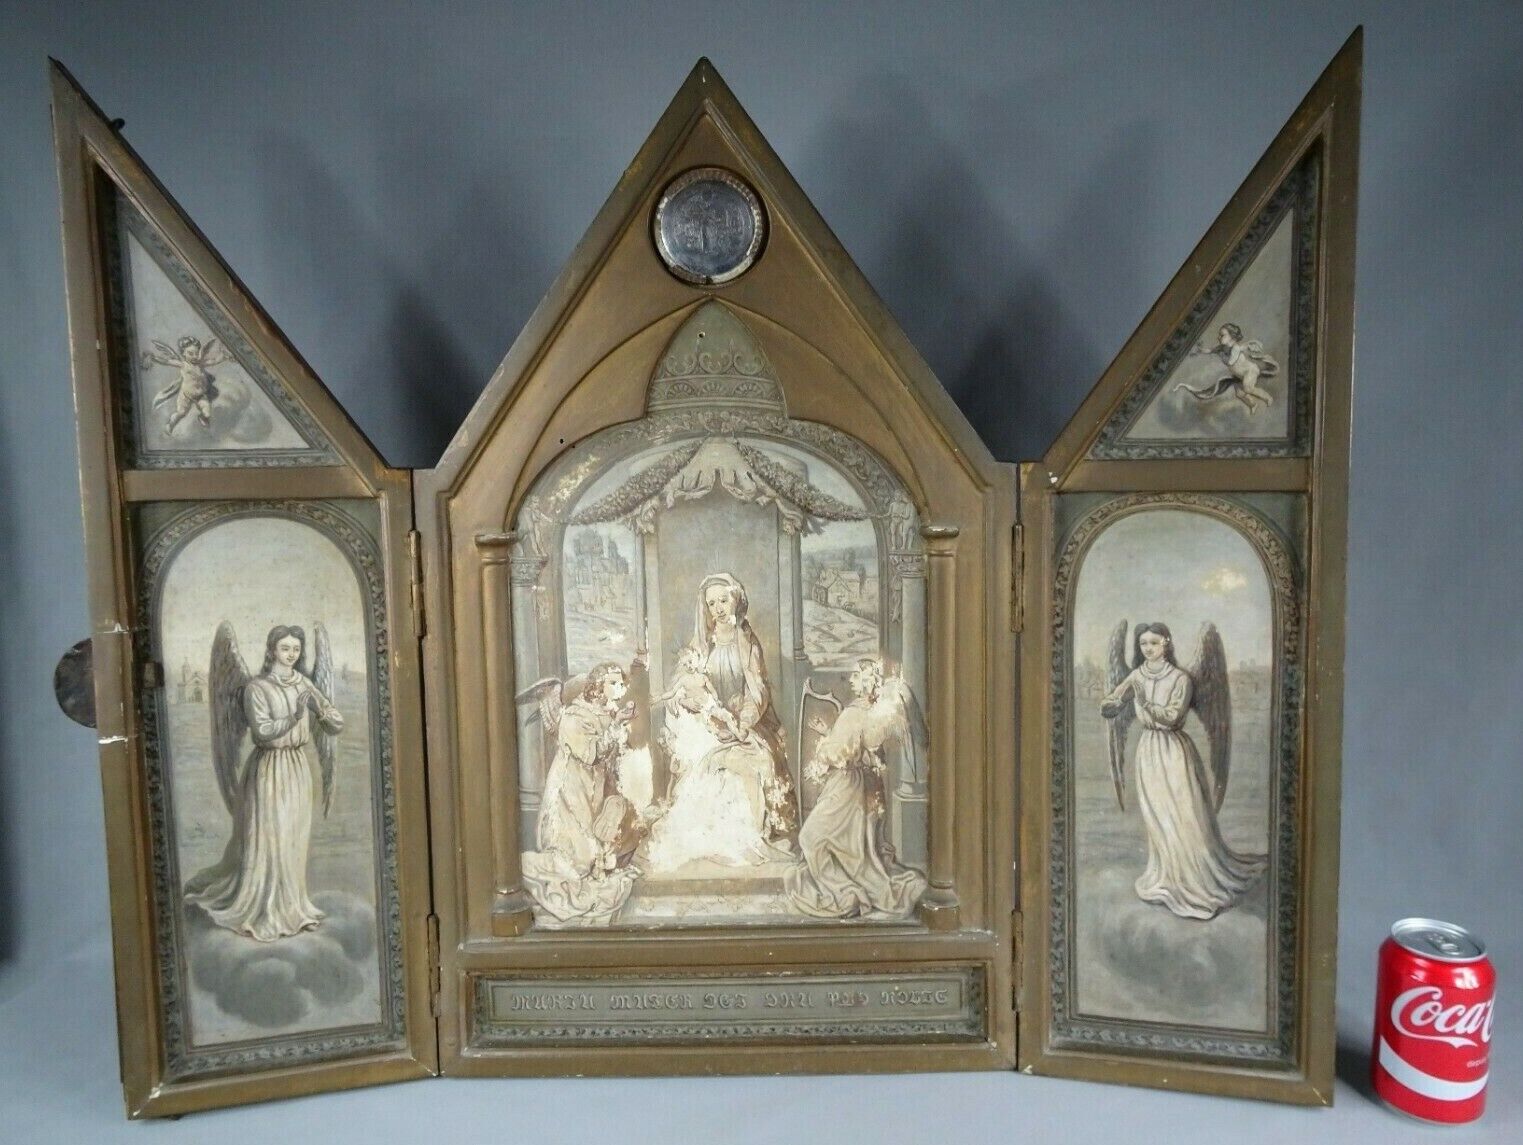 Antique Large Wood Hand Painted Religious Triptych Altarpiece Icon 19th C.